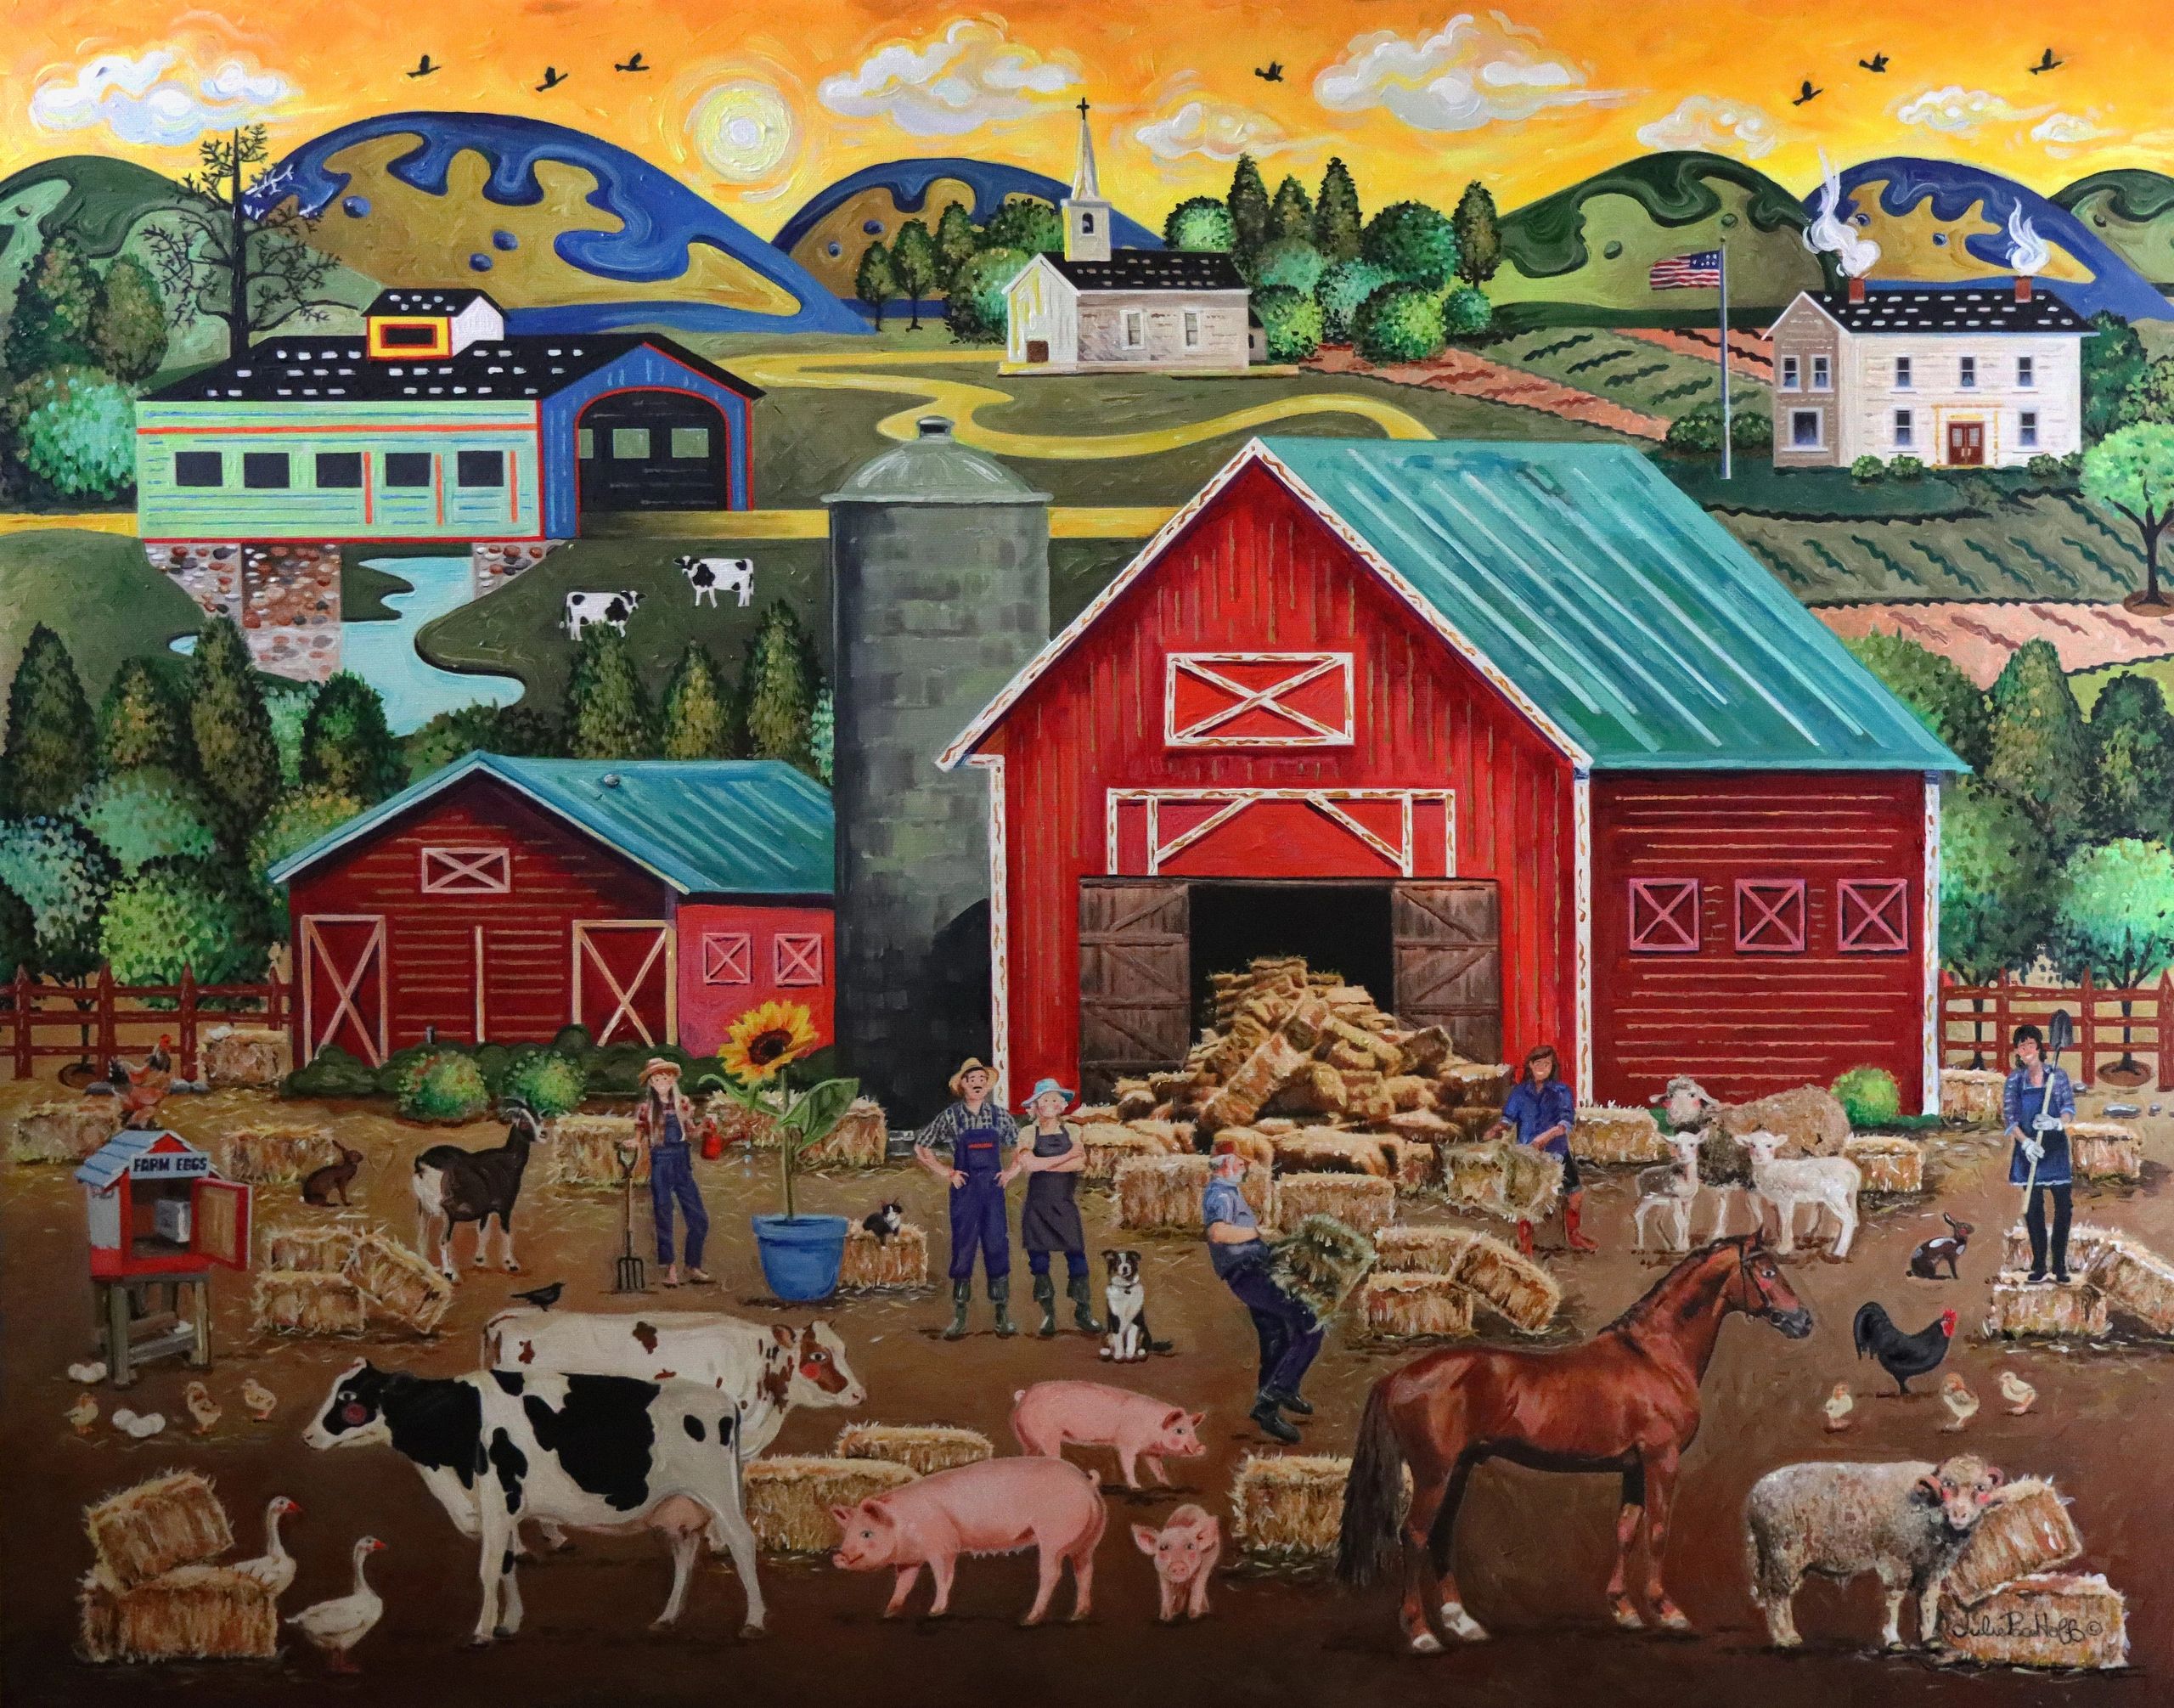 Hay Barn With Farm Animals has pigs, a horse, cows, chickens, and a barn in a country landscape.